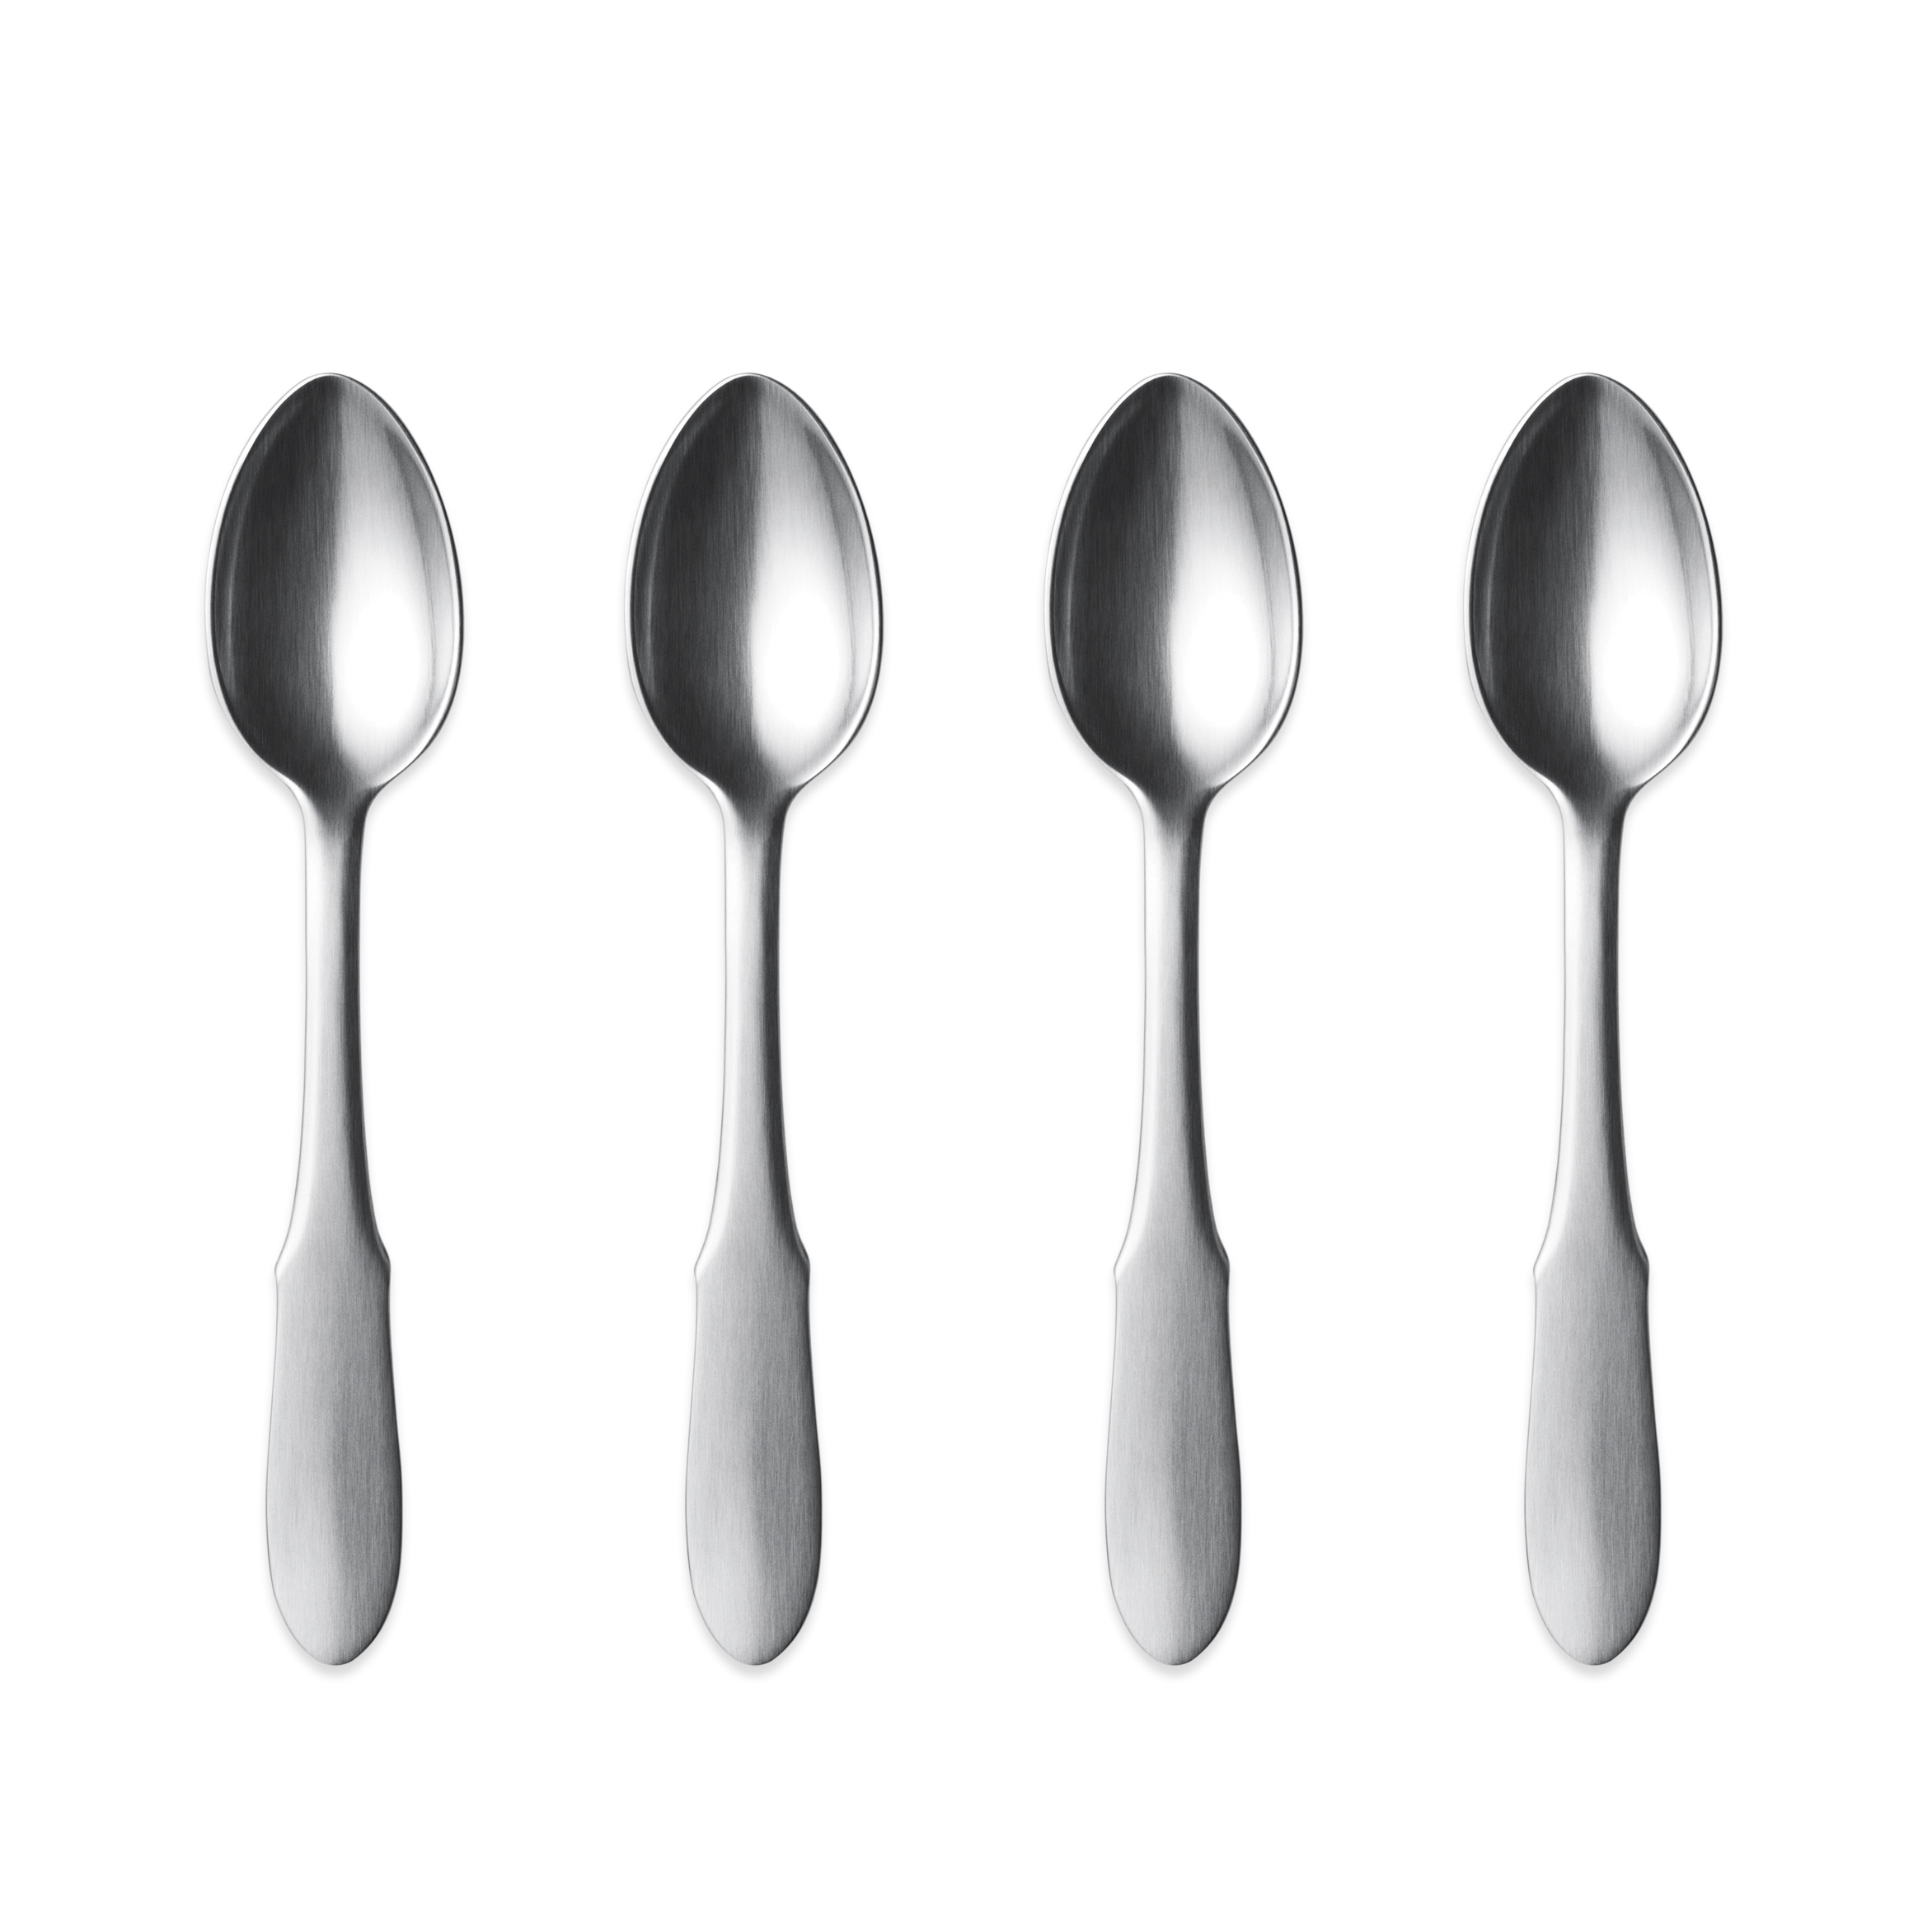 Georg Jensen Mitra Matte by Georg Jensen Stainless Steel Place Setting 5 Piece New 